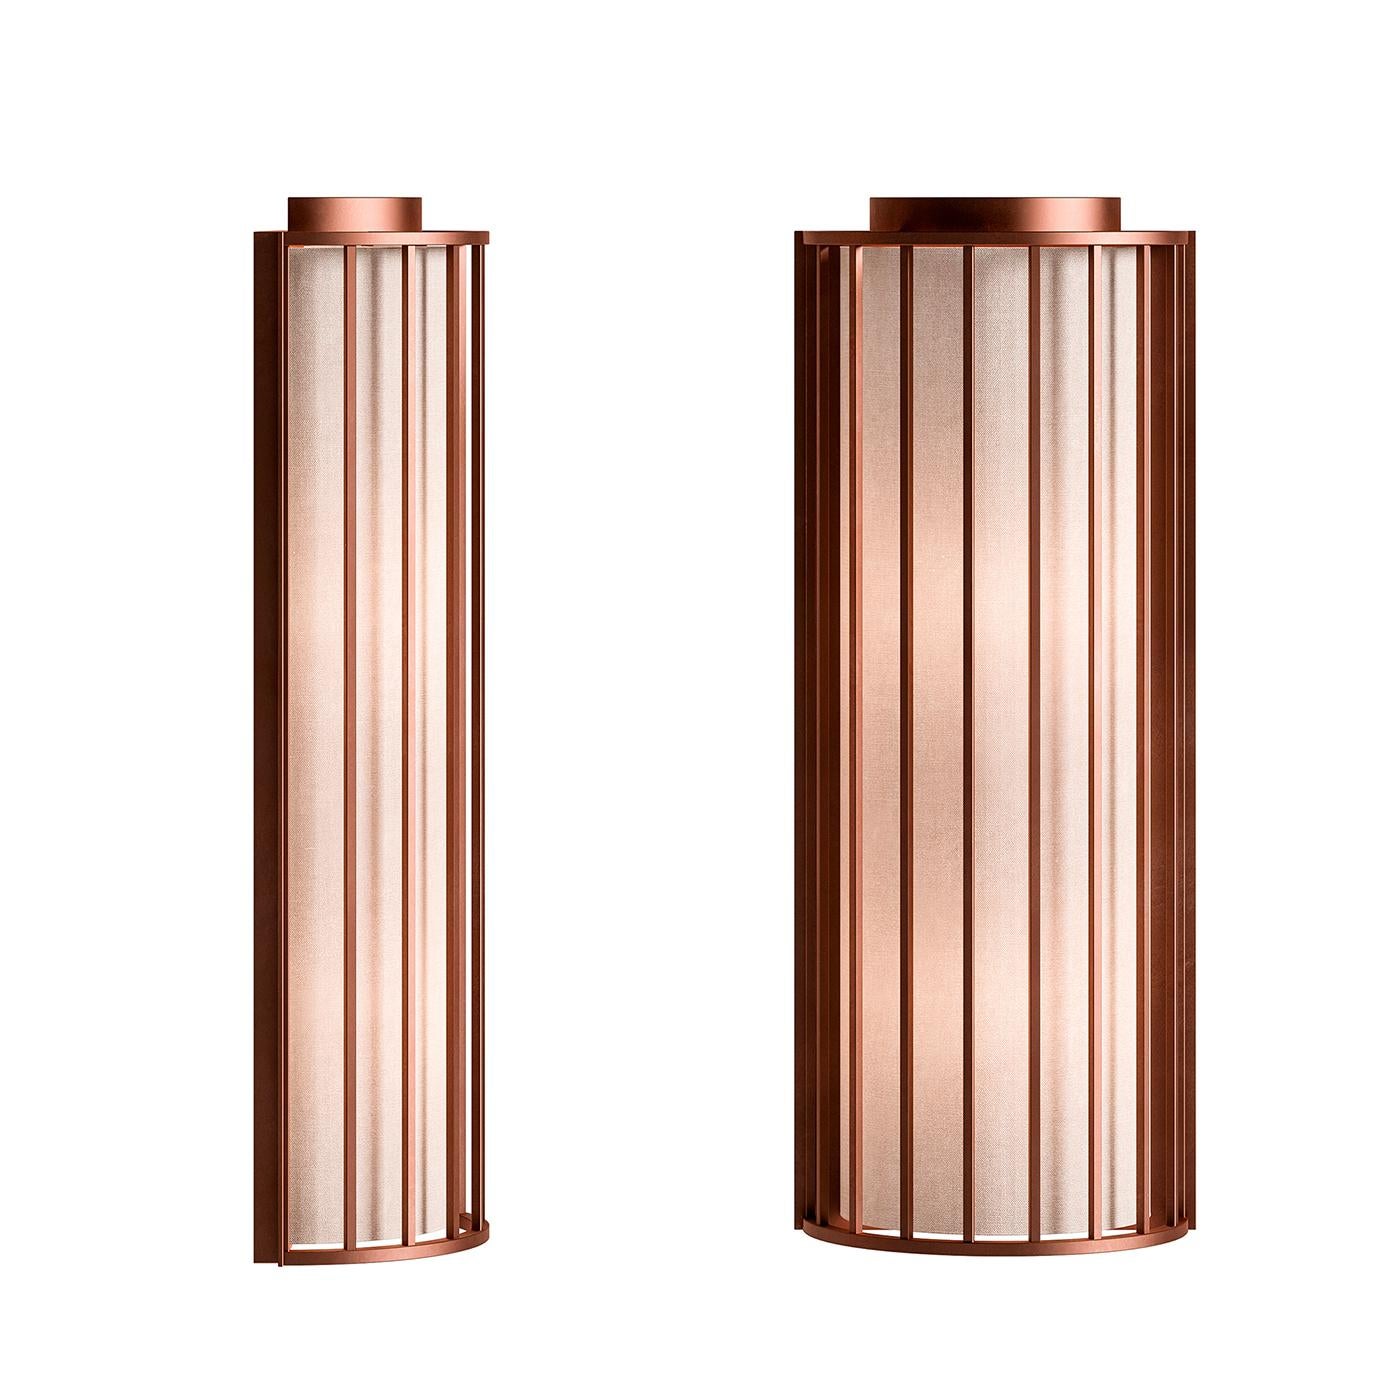 Old and new blend seamlessly together in this remarkable wall sconce that showcases a sculptural profile reminiscent of old lanterns. Marked by a cage-style cylindrical frame, this sconce is crafted of metal with a brushed-copper finish that